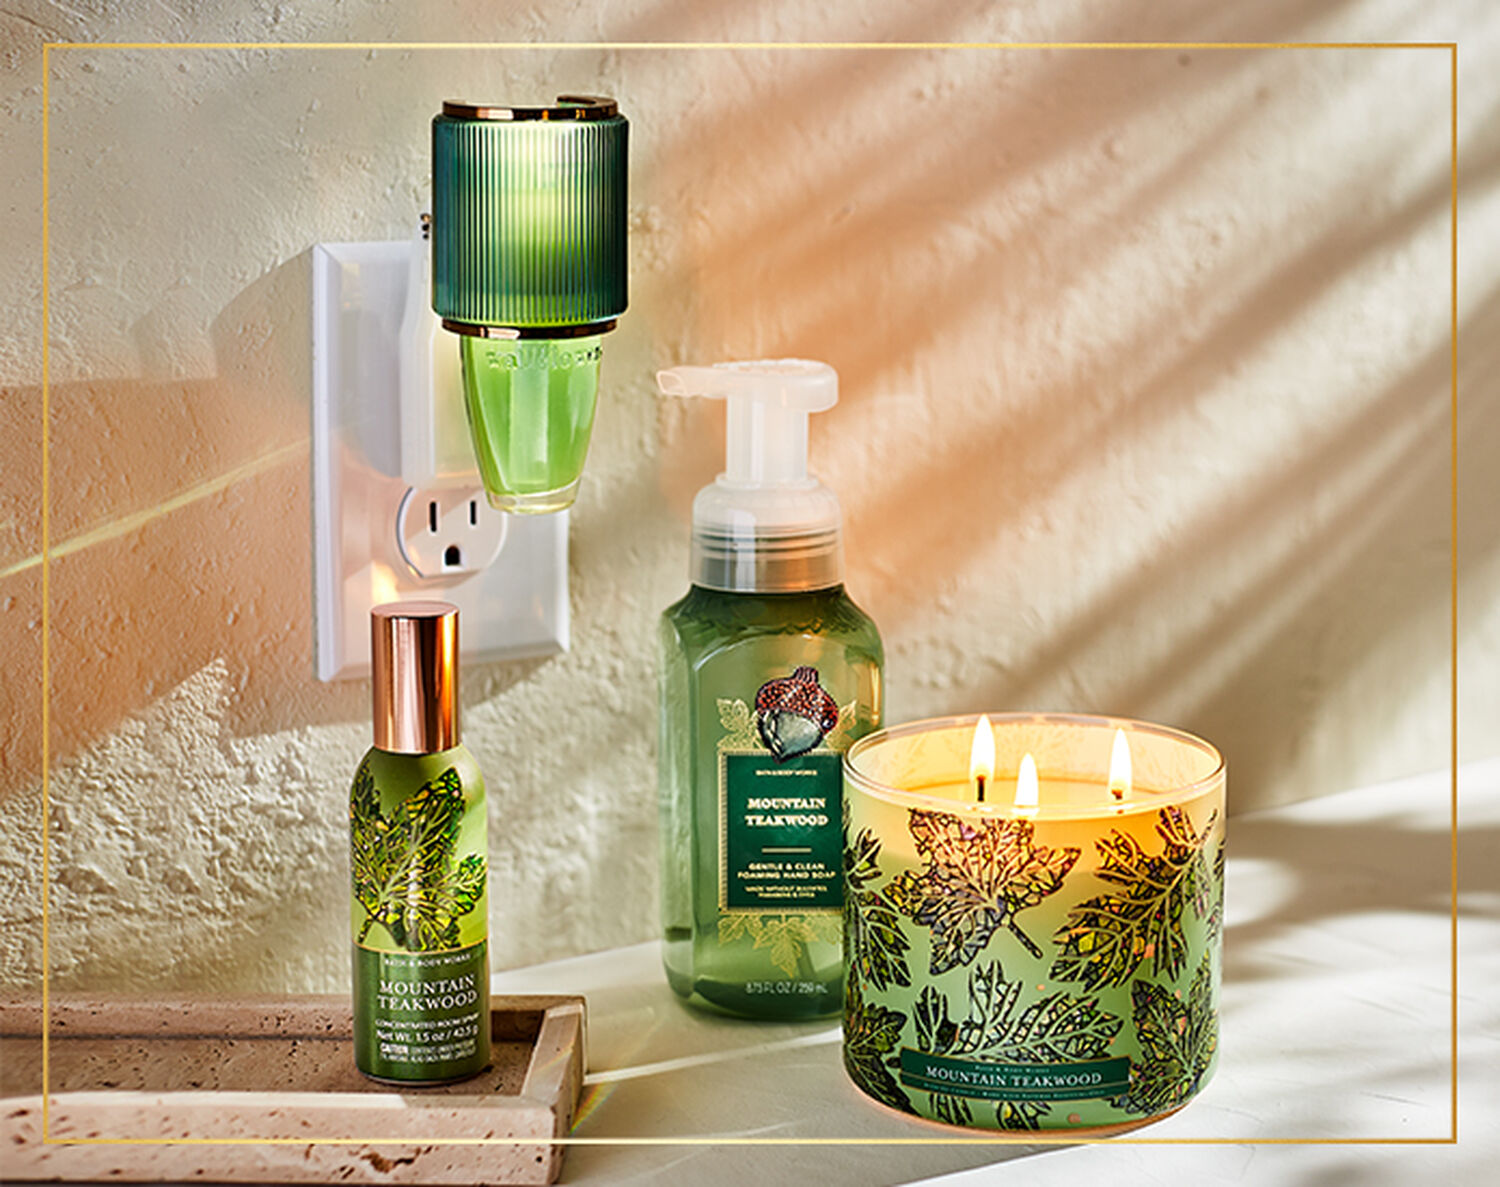 One fragrance. Four ways. Create your best home experience.